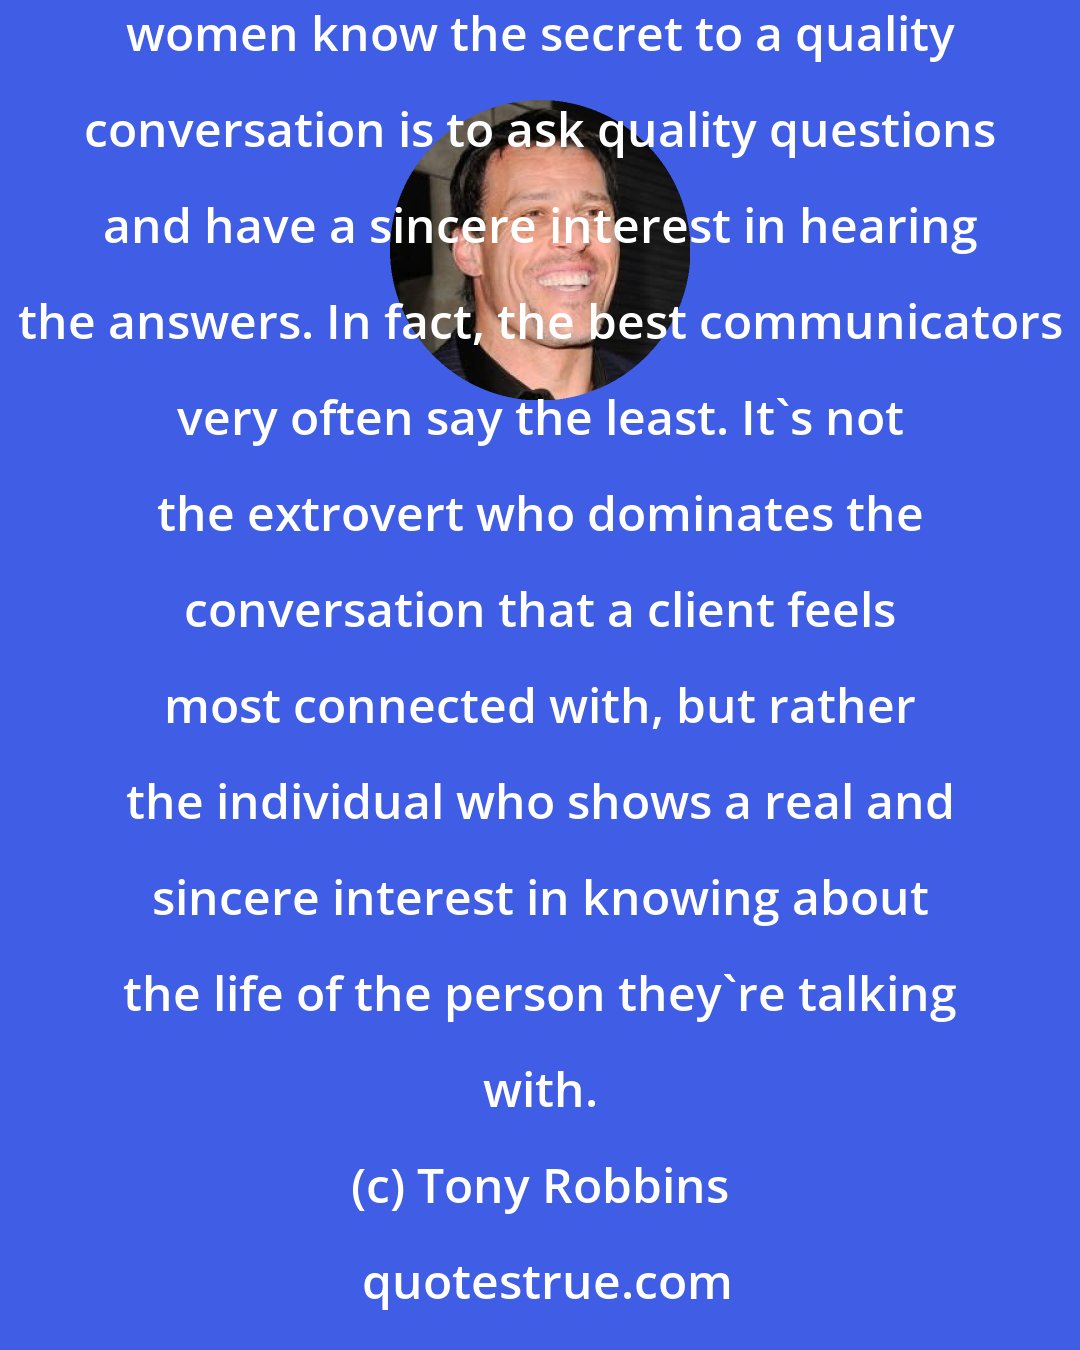 Tony Robbins: I think the most important key to quality communication and interaction is developing an interest in the person you`re talking with. Most women know the secret to a quality conversation is to ask quality questions and have a sincere interest in hearing the answers. In fact, the best communicators very often say the least. It`s not the extrovert who dominates the conversation that a client feels most connected with, but rather the individual who shows a real and sincere interest in knowing about the life of the person they`re talking with.